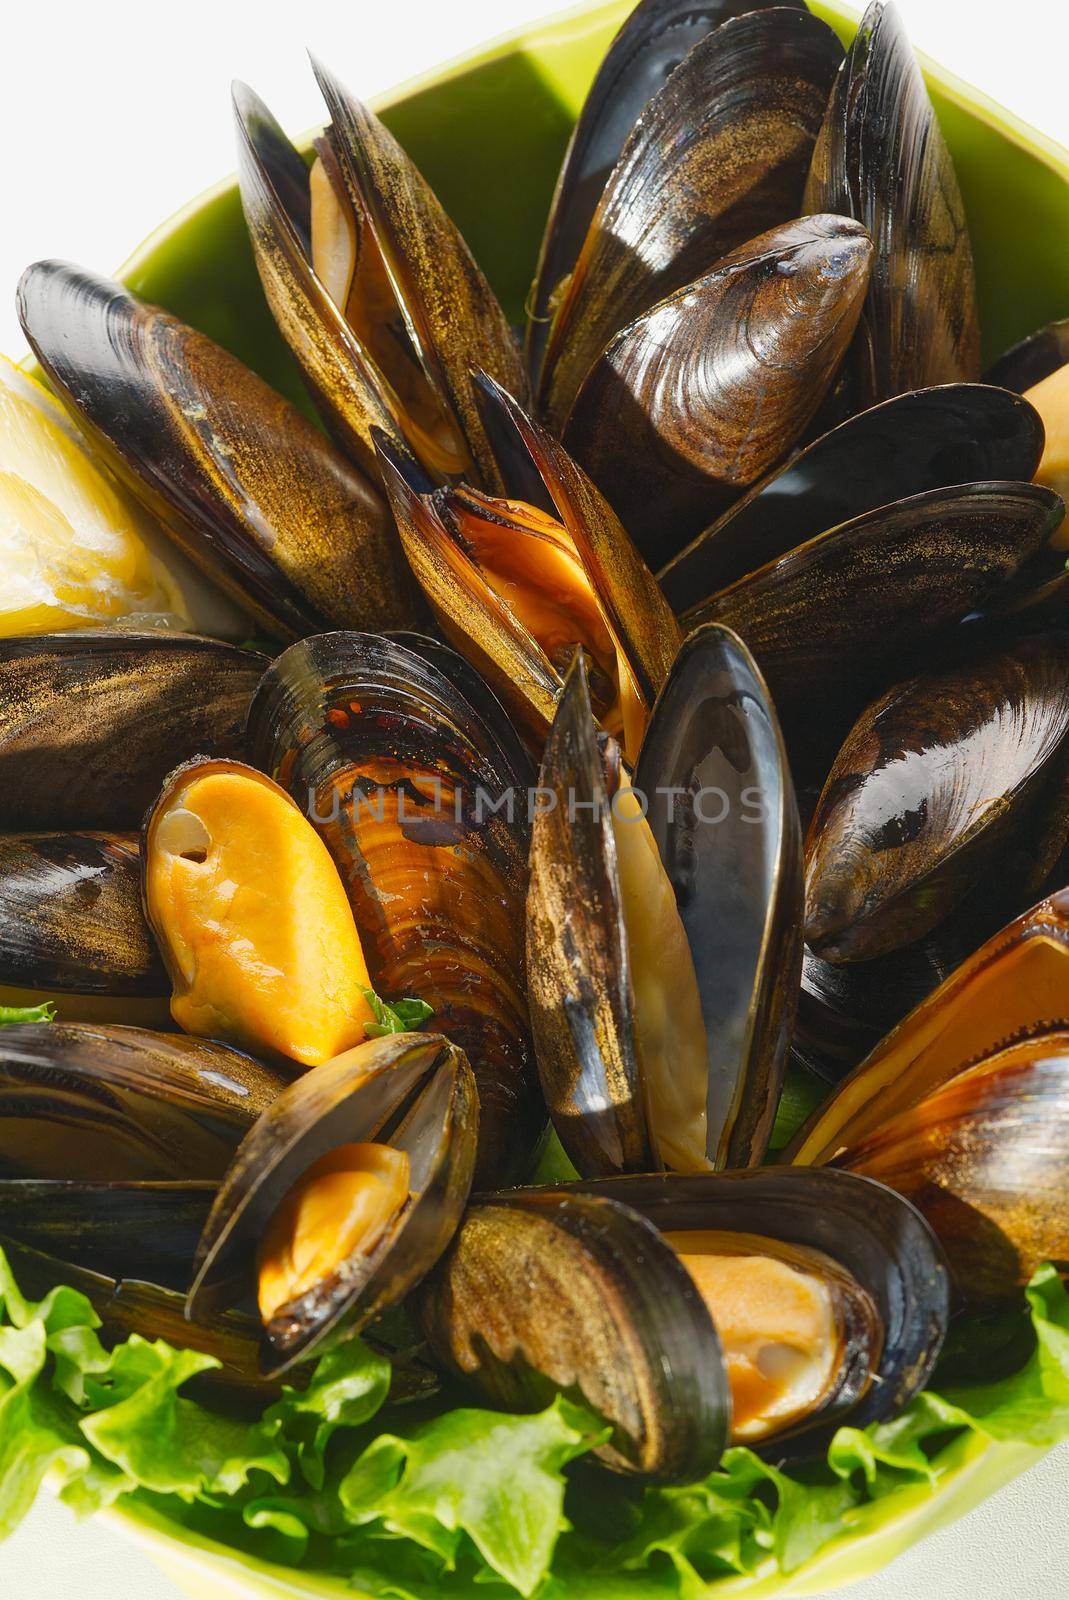 Cooked mussels with lemon and parsley on table. served mussels ready to eat. seafood